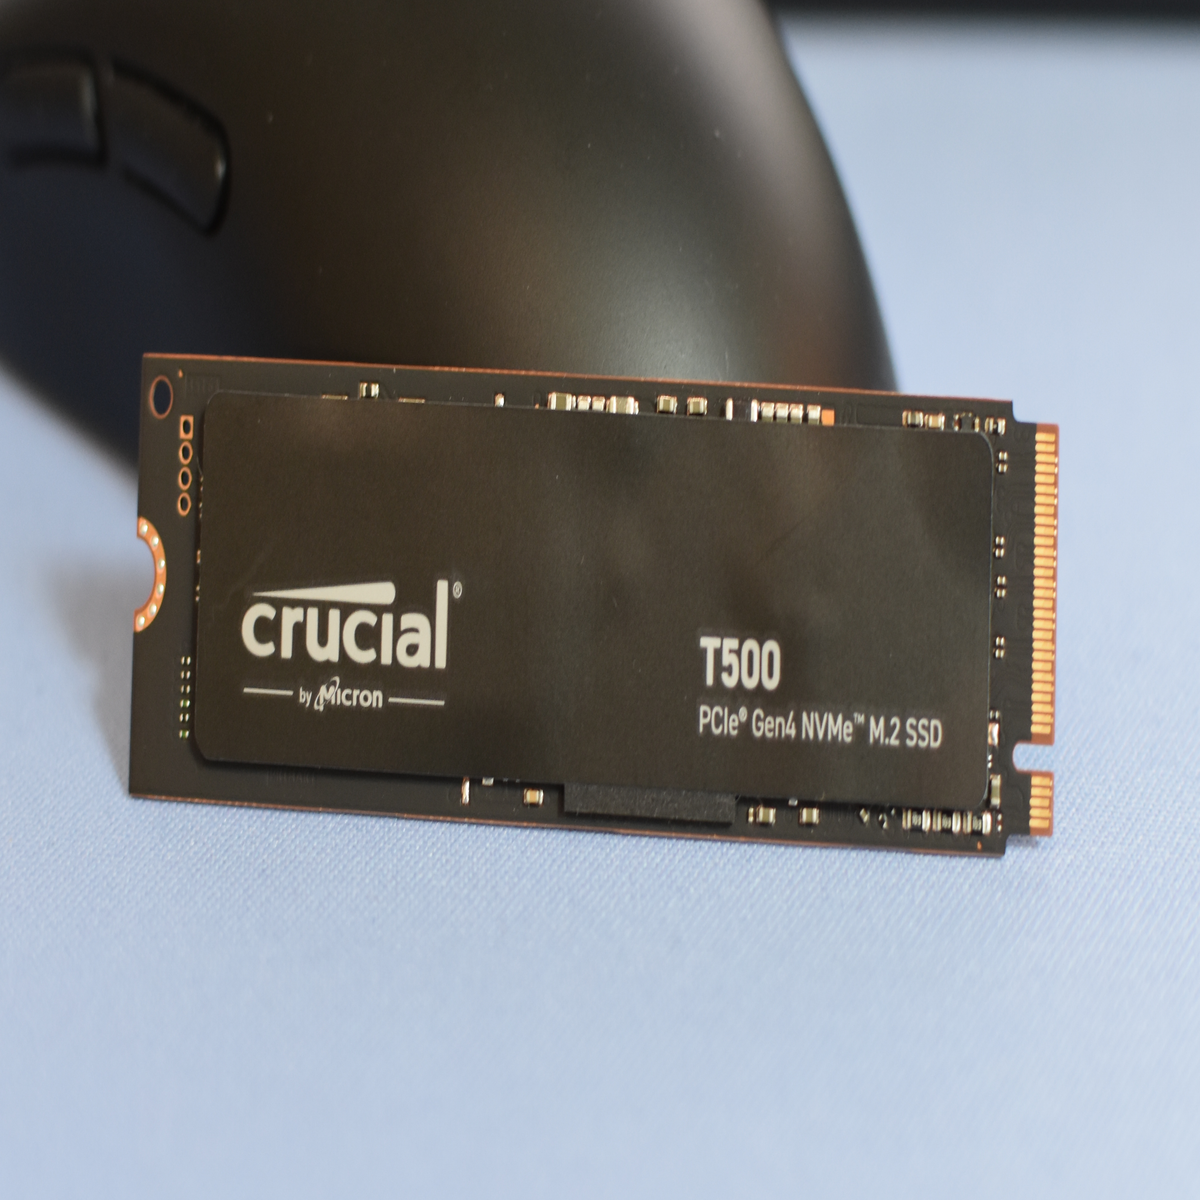 Crucial T500 2TB Review (Page 10 of 10)